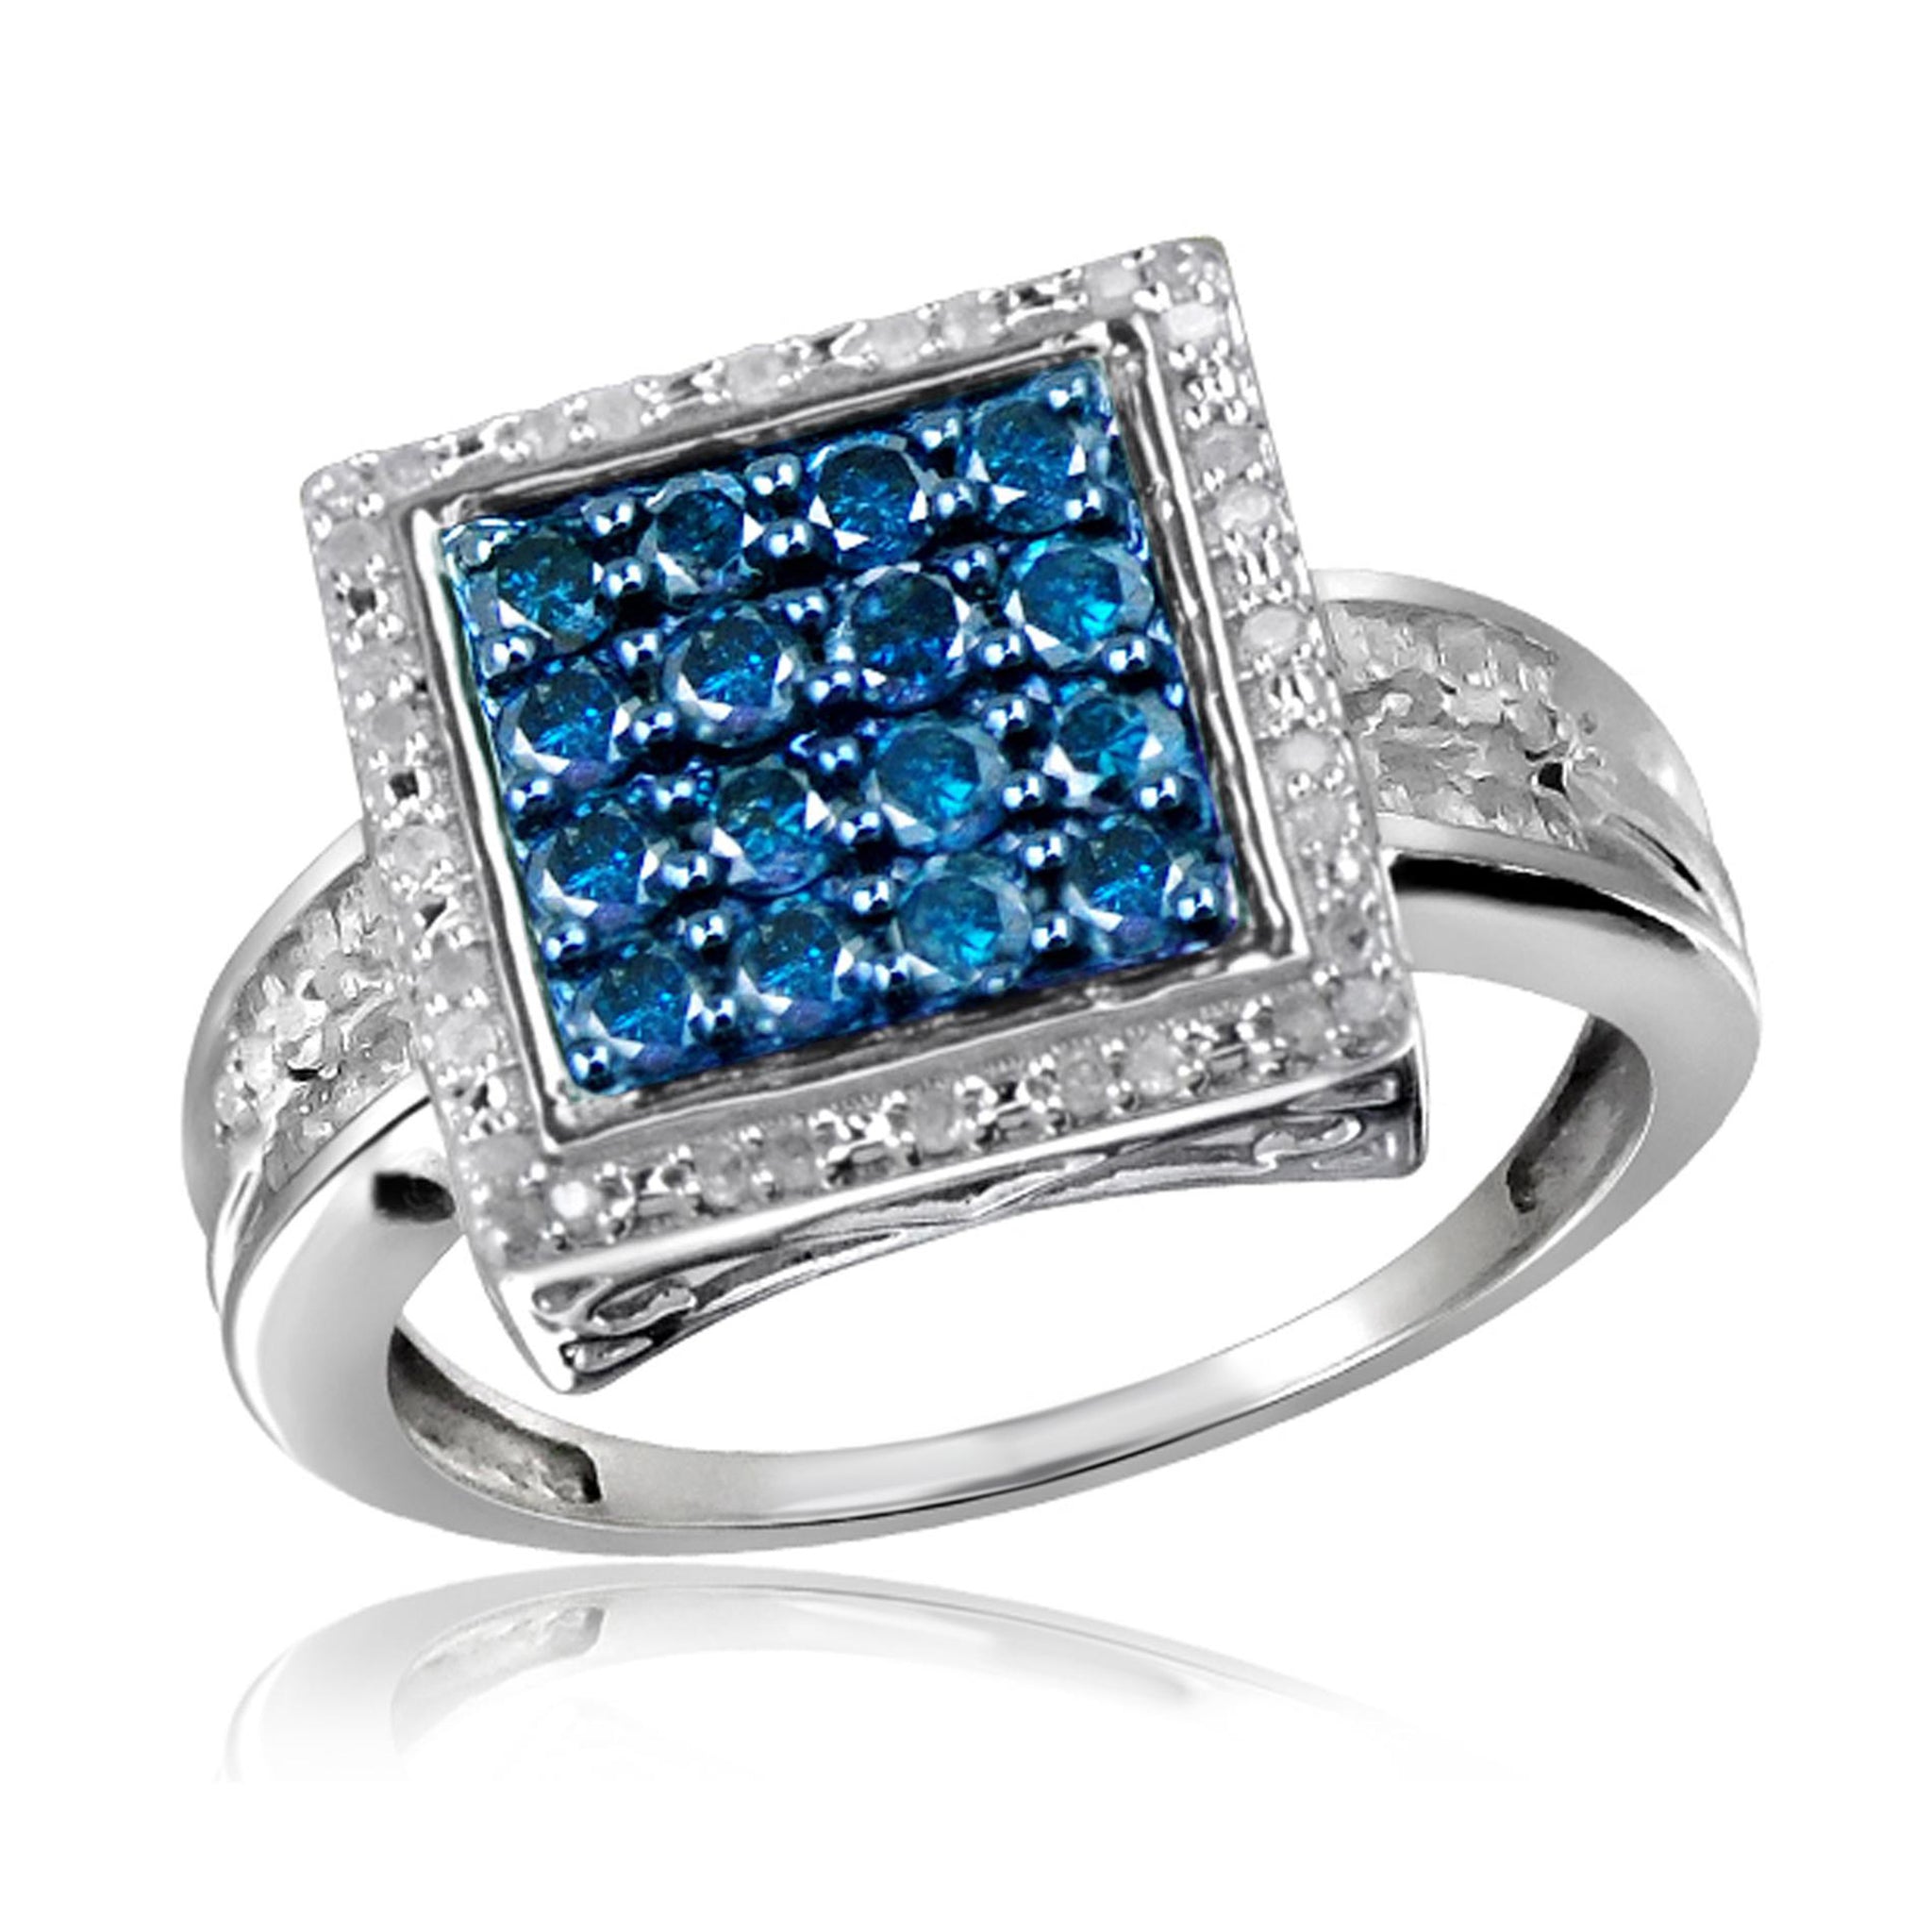 JewelonFire 1.00 CARAT Blue And White Diamond Sterling Silver Square Halo Ring